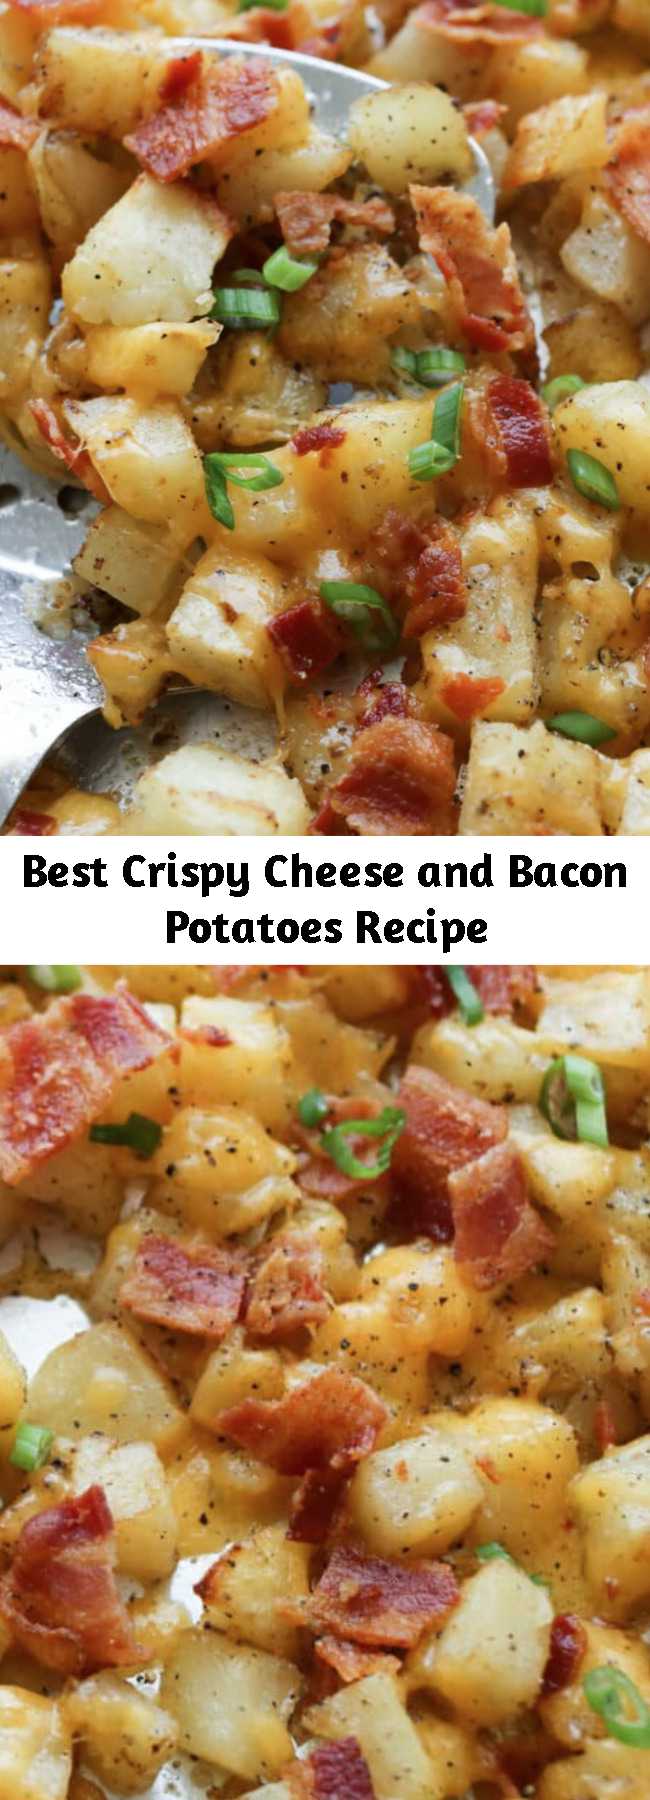 Best Crispy Cheese and Bacon Potatoes Recipe - Crispy roasted potatoes, topped with melting cheese and plenty of crisp bacon are a great side dish (or main dish!) for any meal. These really are the best ever Cheesy Potatoes! I’ve served them with eggs for breakfast and with herb roasted chicken for dinner.